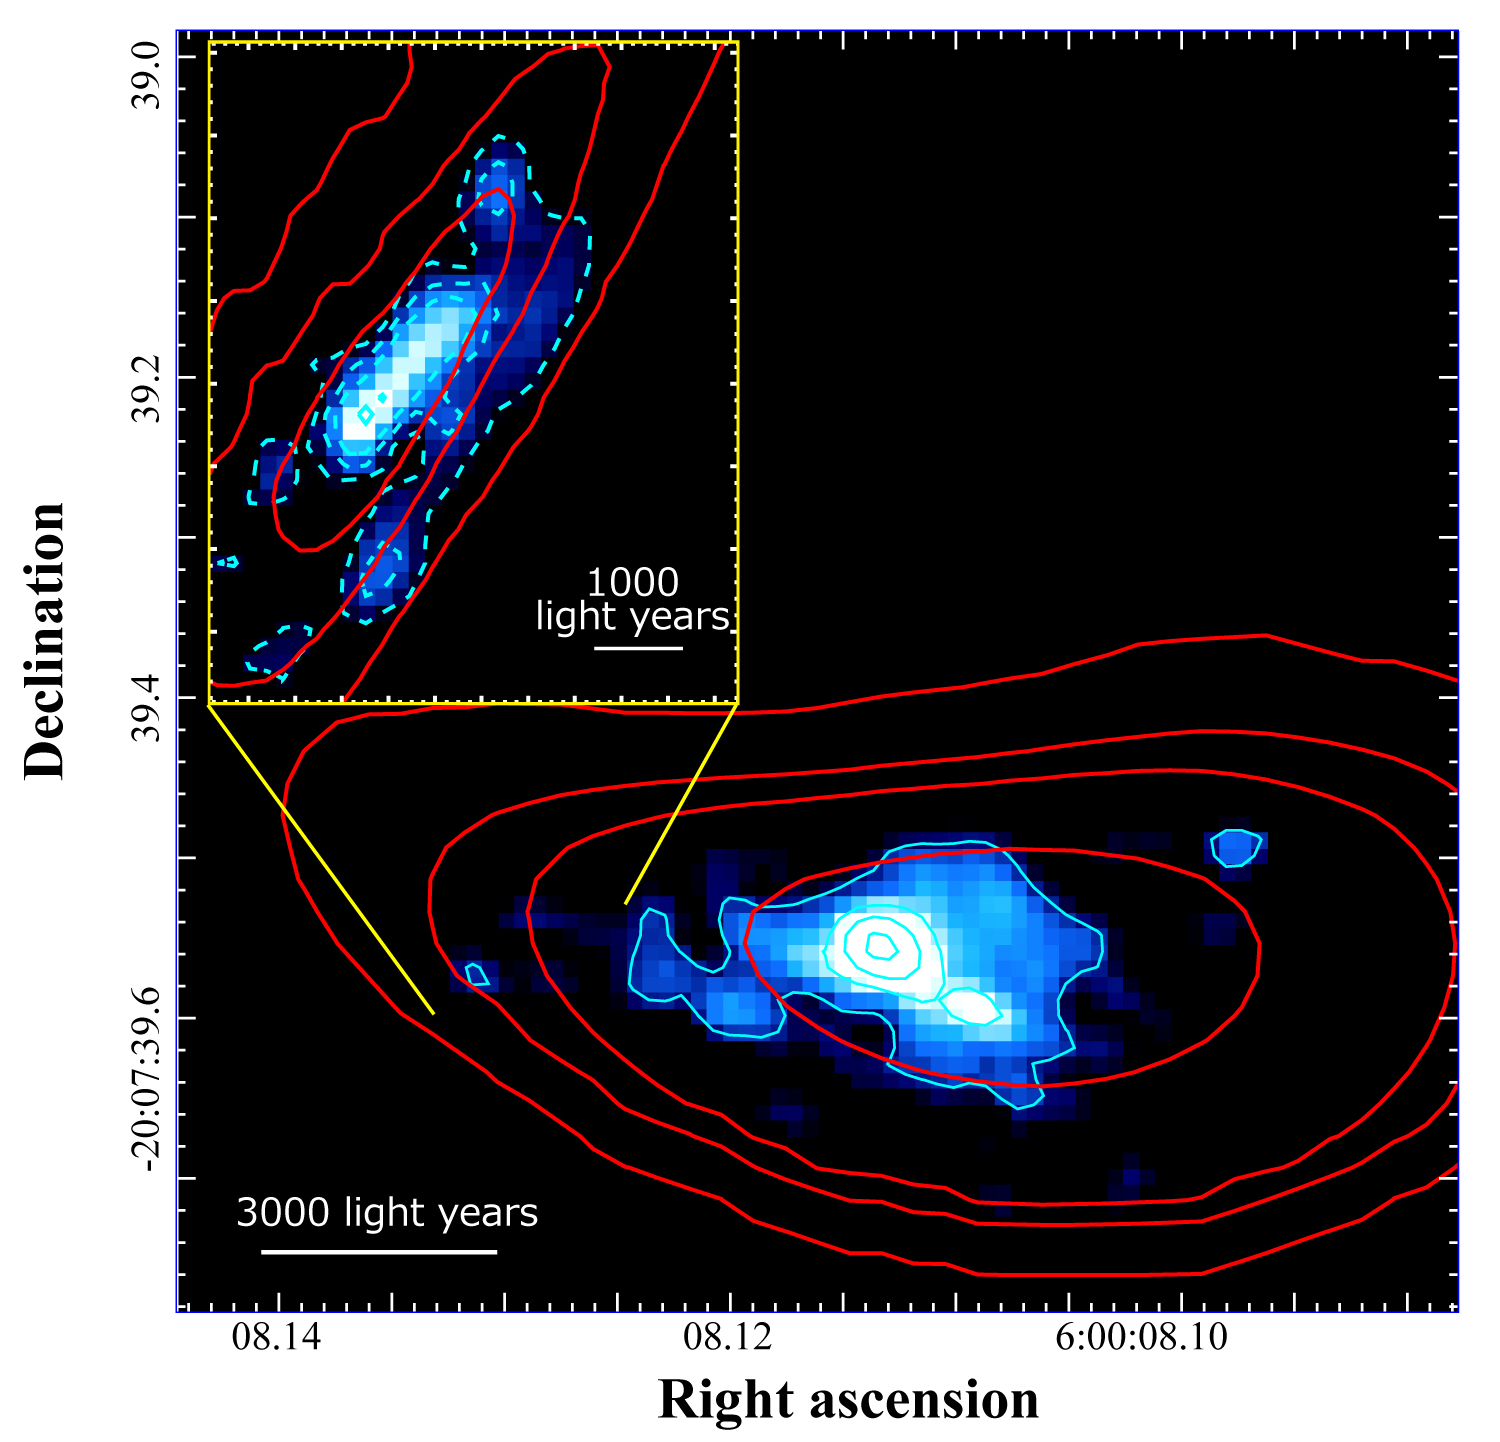 Reconstructed image of the distant galaxy RXCJ0600-z6 by compensating for the gravitational lensing effect caused by the galaxy cluster. The red contours show the distribution of radio waves emitted by carbon ions captured by ALMA, and the blue contours show the spread of light captured by the Hubble Space Telescope. The critical line, where the light intensity from gravitational lensing is at its maximum, runs along the left side of the galaxy, so this part of the galaxy was further magnified (inset image). Credit: ALMA (ESO/NAOJ/NRAO), Fujimoto et al., NASA/ESA Hubble Space Telescope